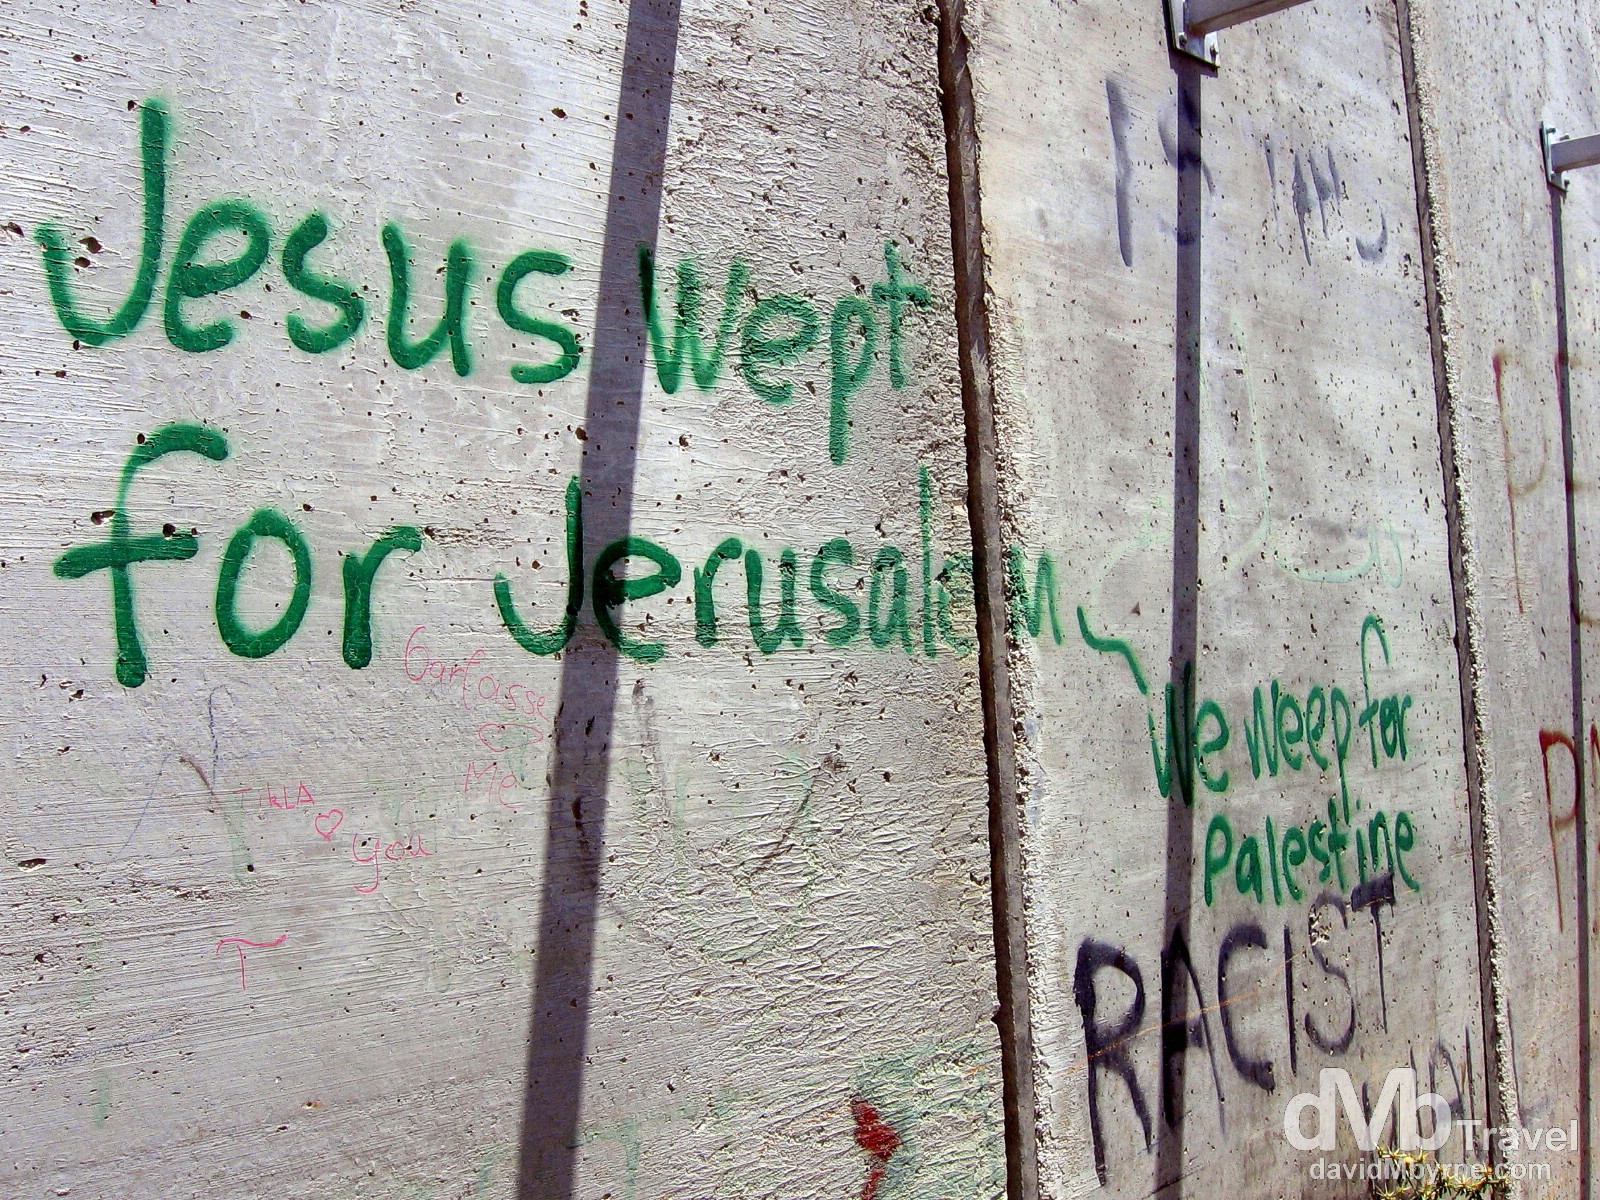 Jesus wept for Jerusalem. A section of the heavily guarded wall separating the Palestinian West Back from Israel. May 2, 2008. 